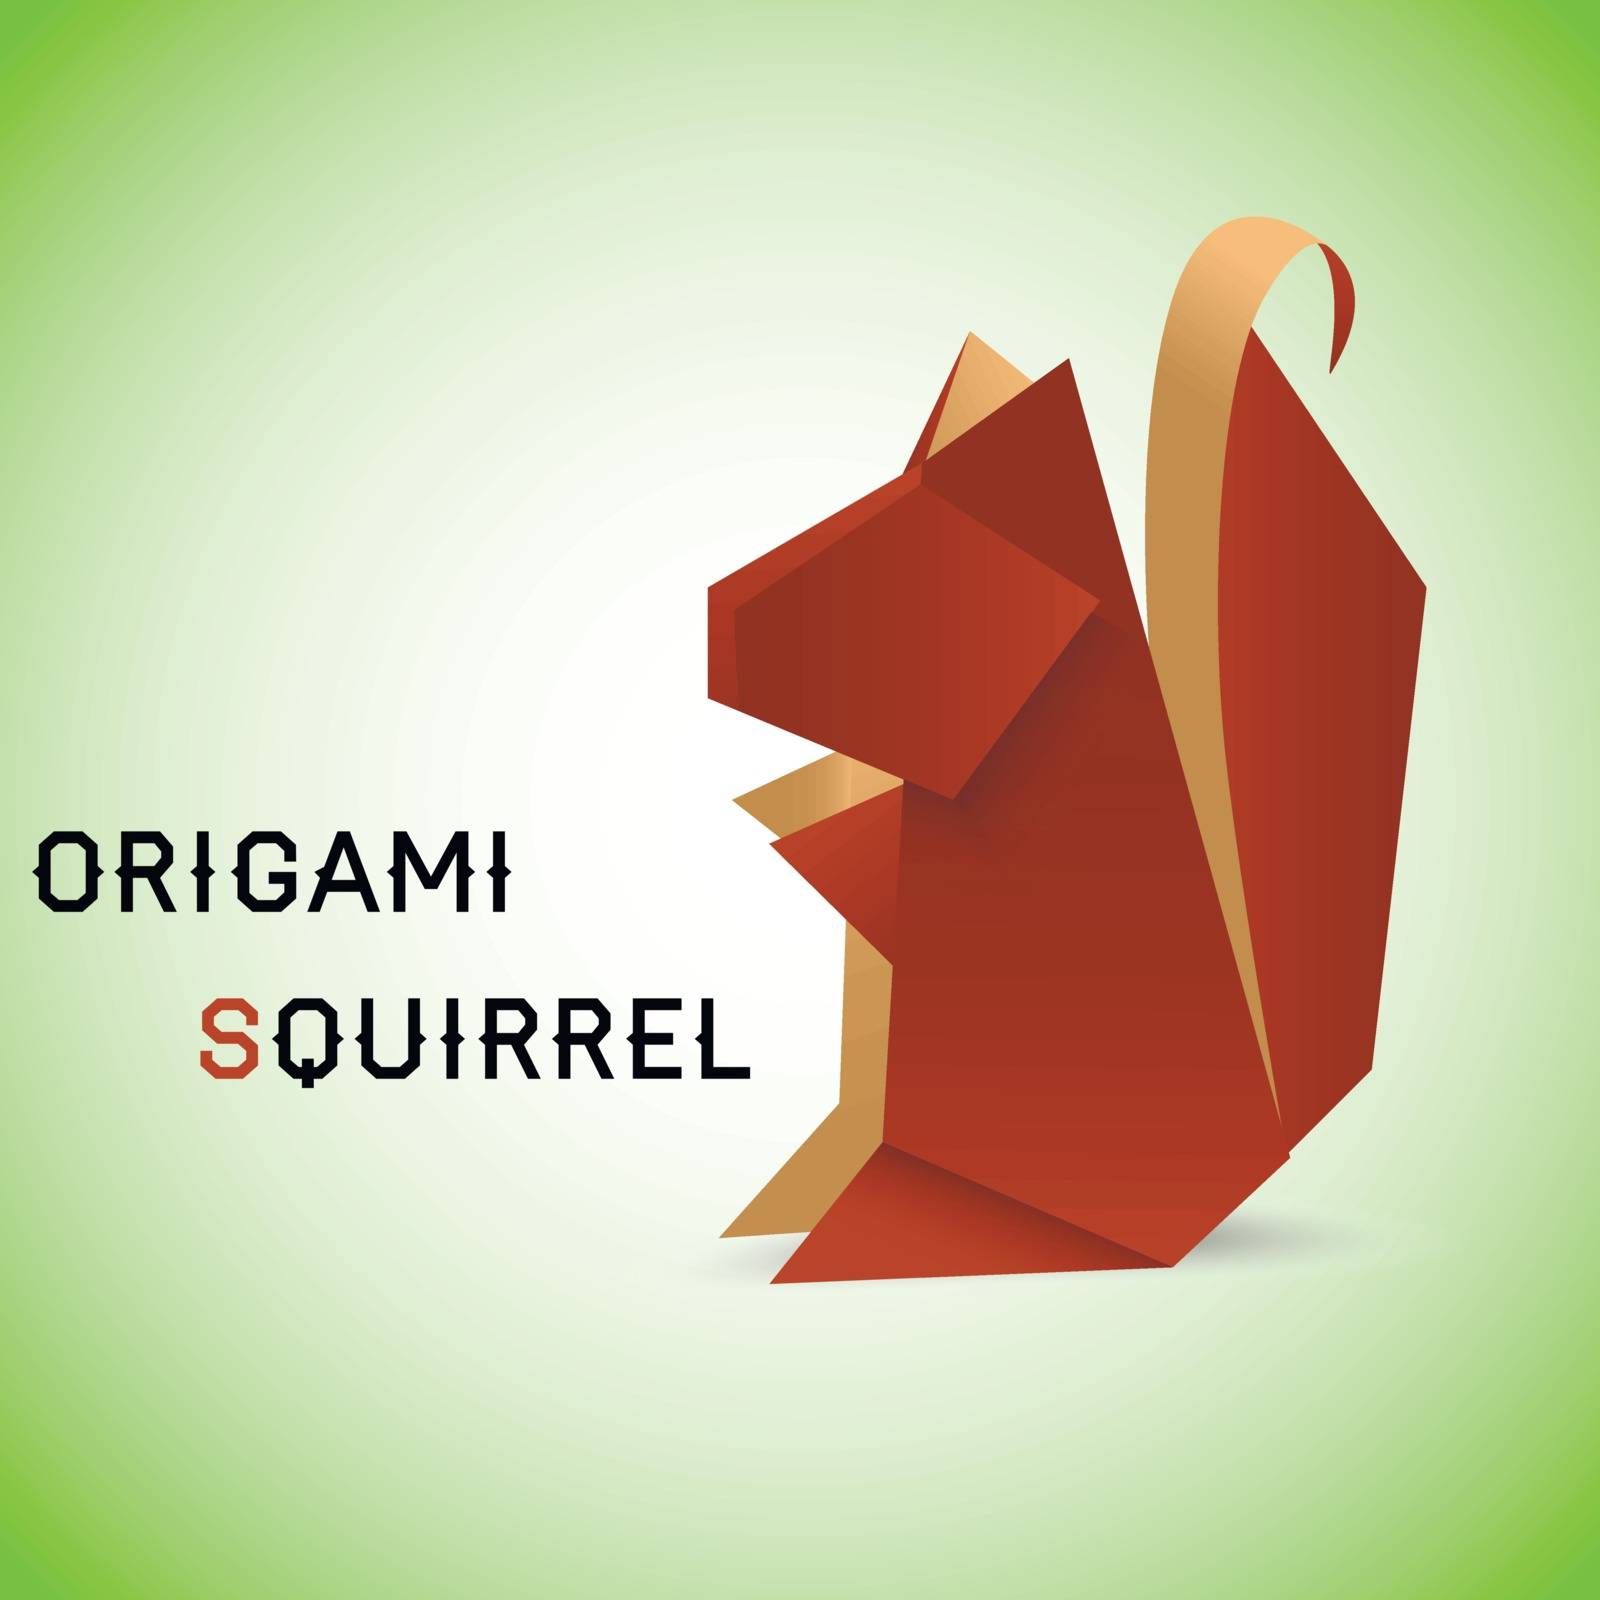 Squirrel origami by Coline